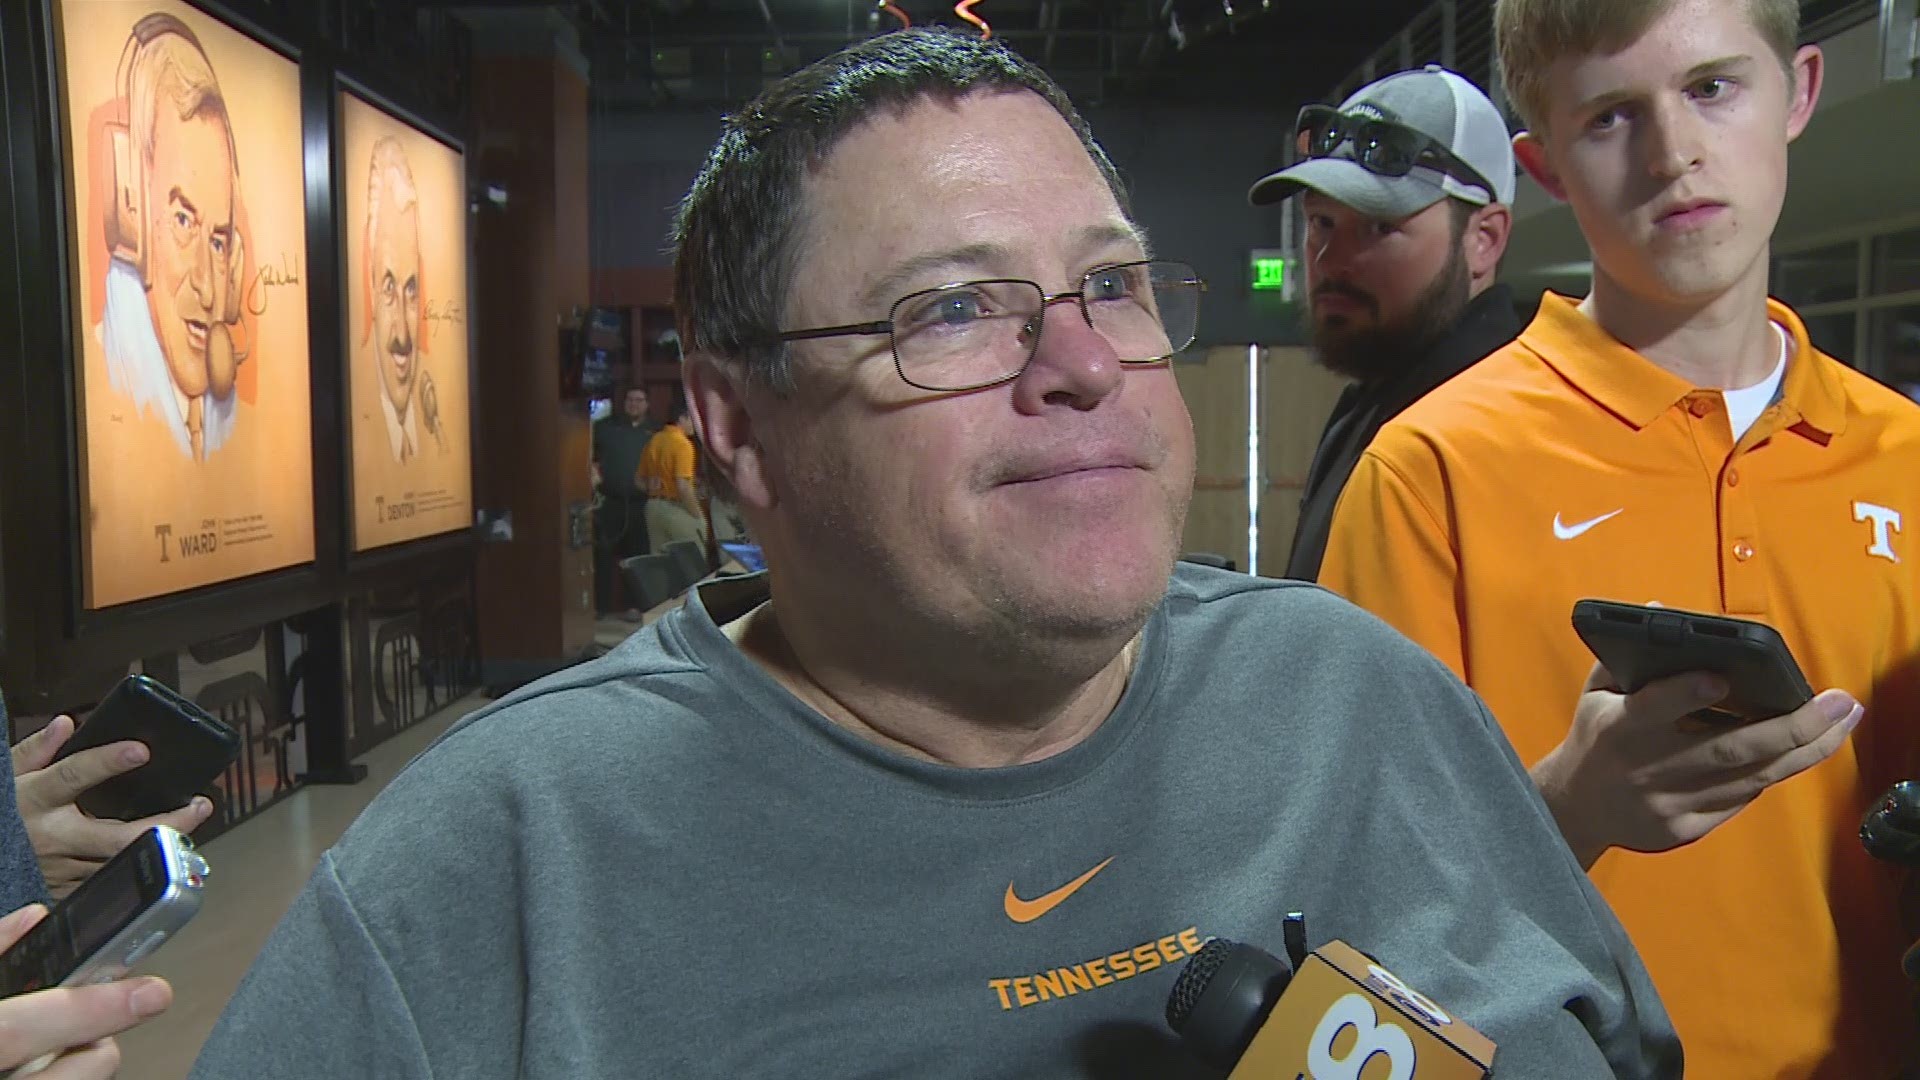 Tennessee's offensive line struggled last season, to say the least. New offensive coordinator Jim Chaney says coaching around a bad offensive line is impossible but he thinks this group will improve.